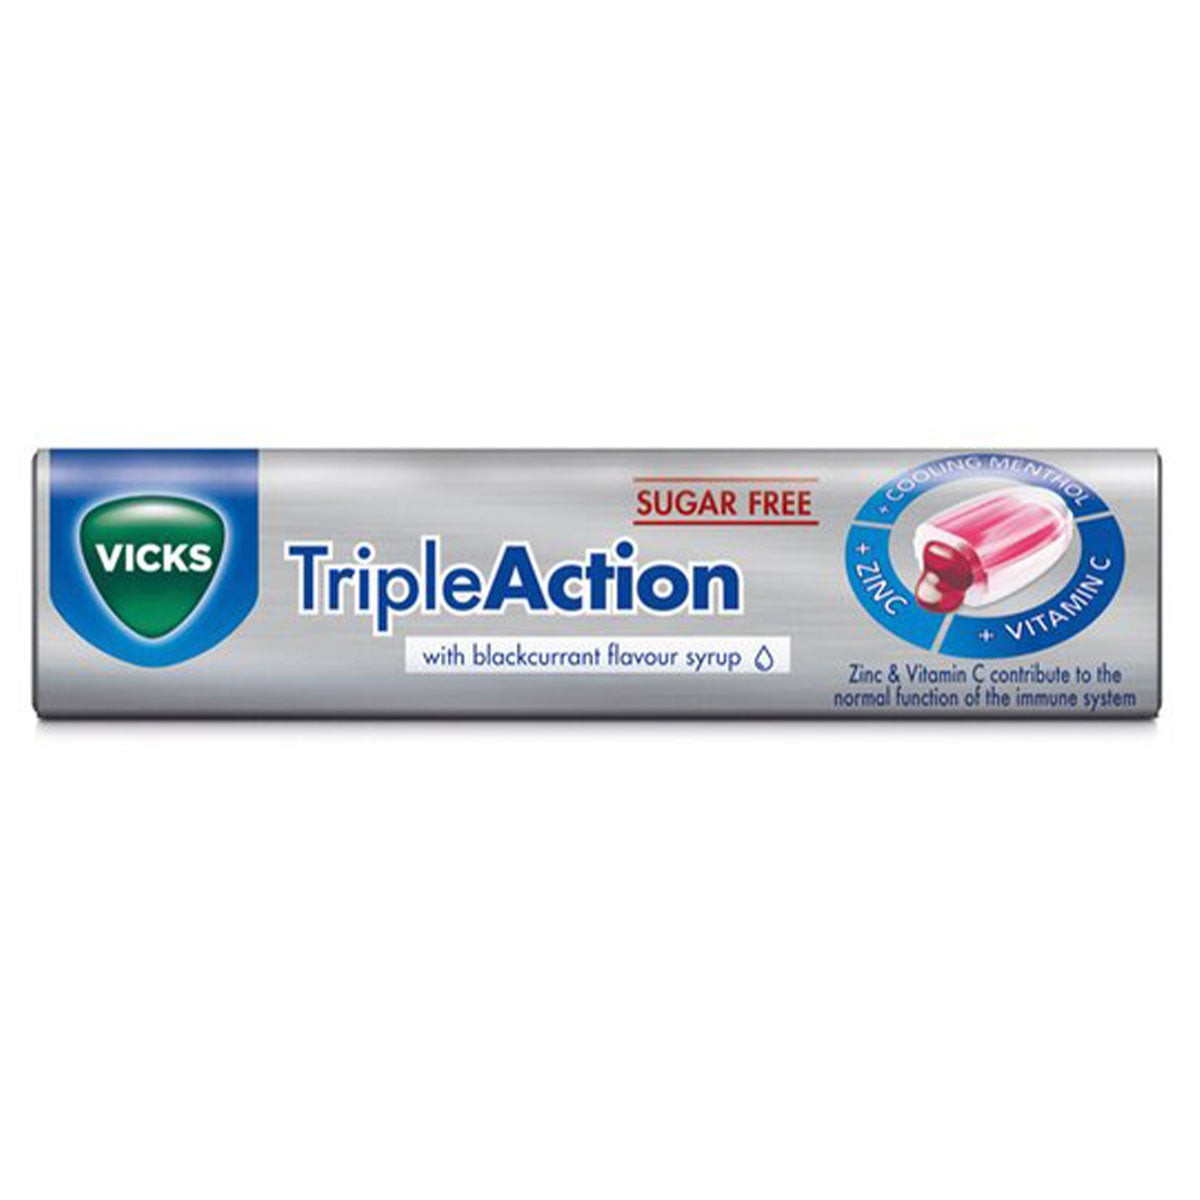 Vicks - Triple Action Blackcurrant Throat Sweet - 42g - Continental Food Store